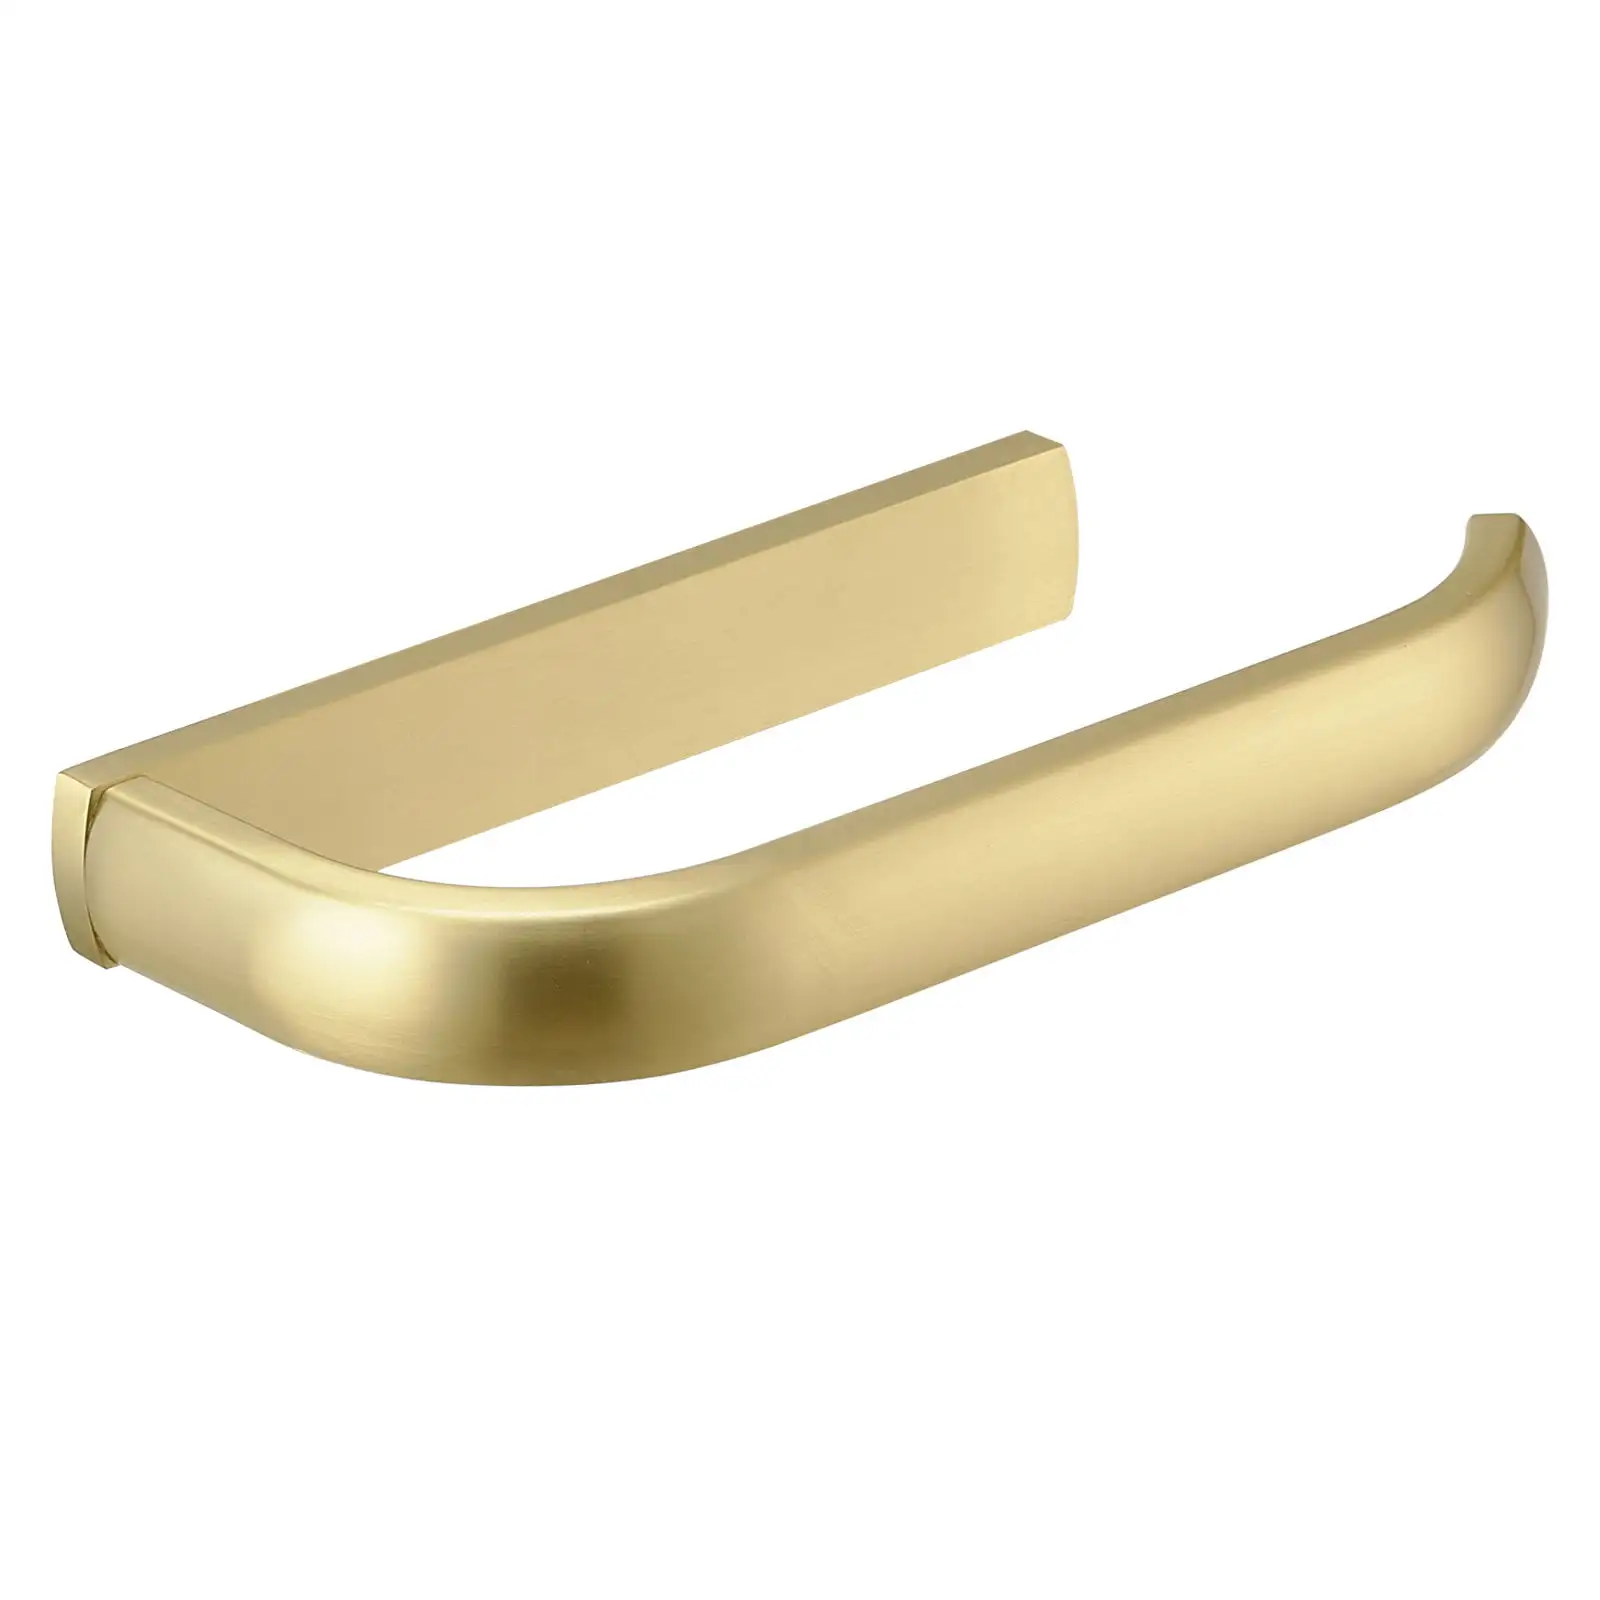 Brushed Gold Stainless Steel Toilet Tissue Paper Holder Bathroom Accessories Wall Mounted